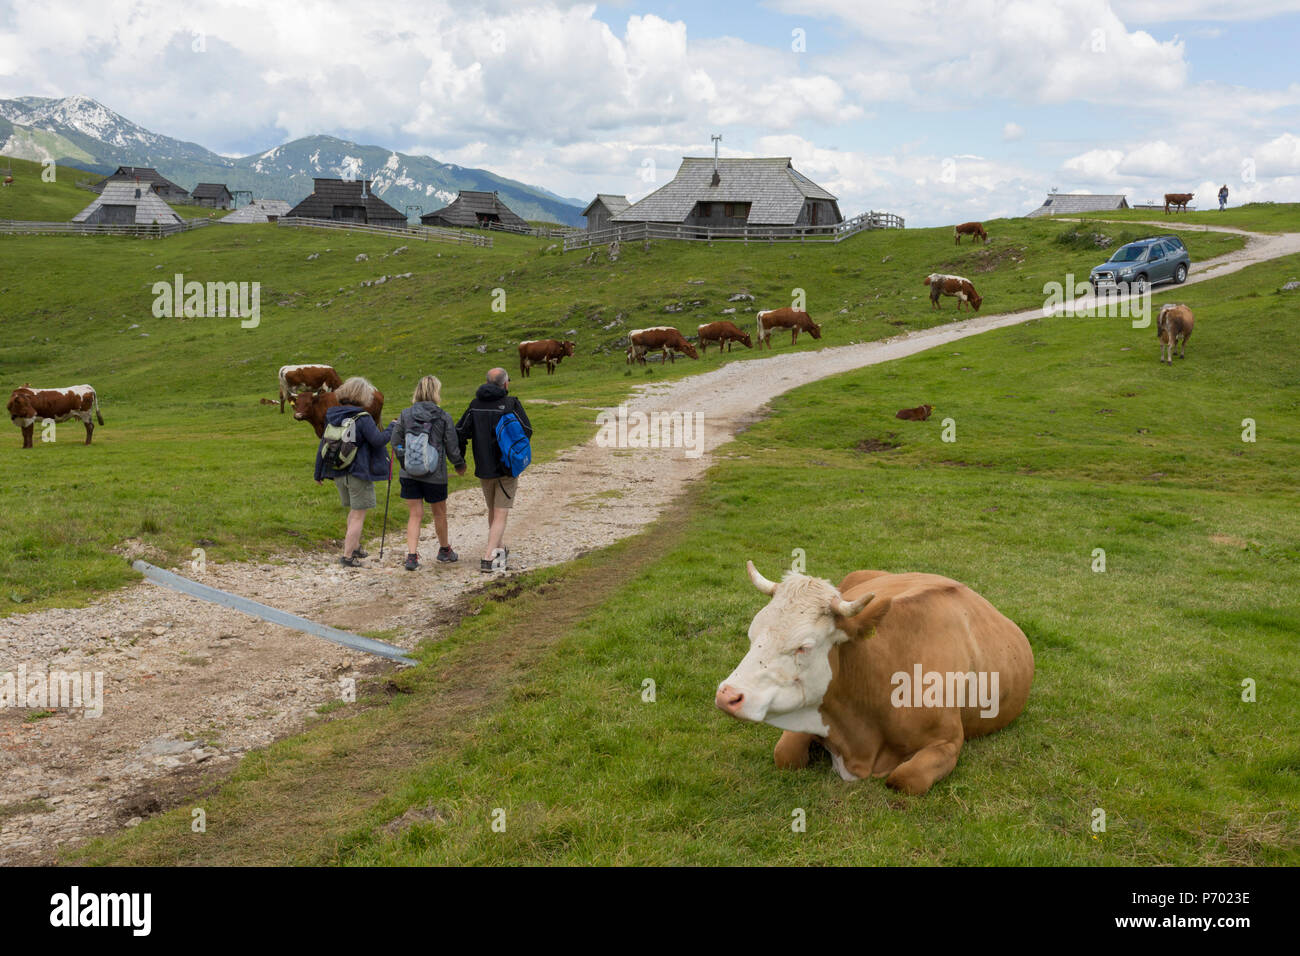 Walkers pass grazing cows near the collection of Slovenian herders' mountain huts in Velika Planina, on 26th June 2018, in Velika Planina, near Kamnik, Slovenia. Velika Planina is a mountain plateau in the Kamnik–Savinja Alps - a 5.8 square kilometres area 1,500 metres (4,900 feet) above sea level. Otherwise known as The Big Pasture Plateau, Velika Planina is a winter skiing destination and hiking route in summer. The herders' huts became popular in the early 1930s as holiday cabins (known as bajtarstvo) but these were were destroyed by the Germans during WW2 and rebuilt right afterwards by Vl Stock Photo